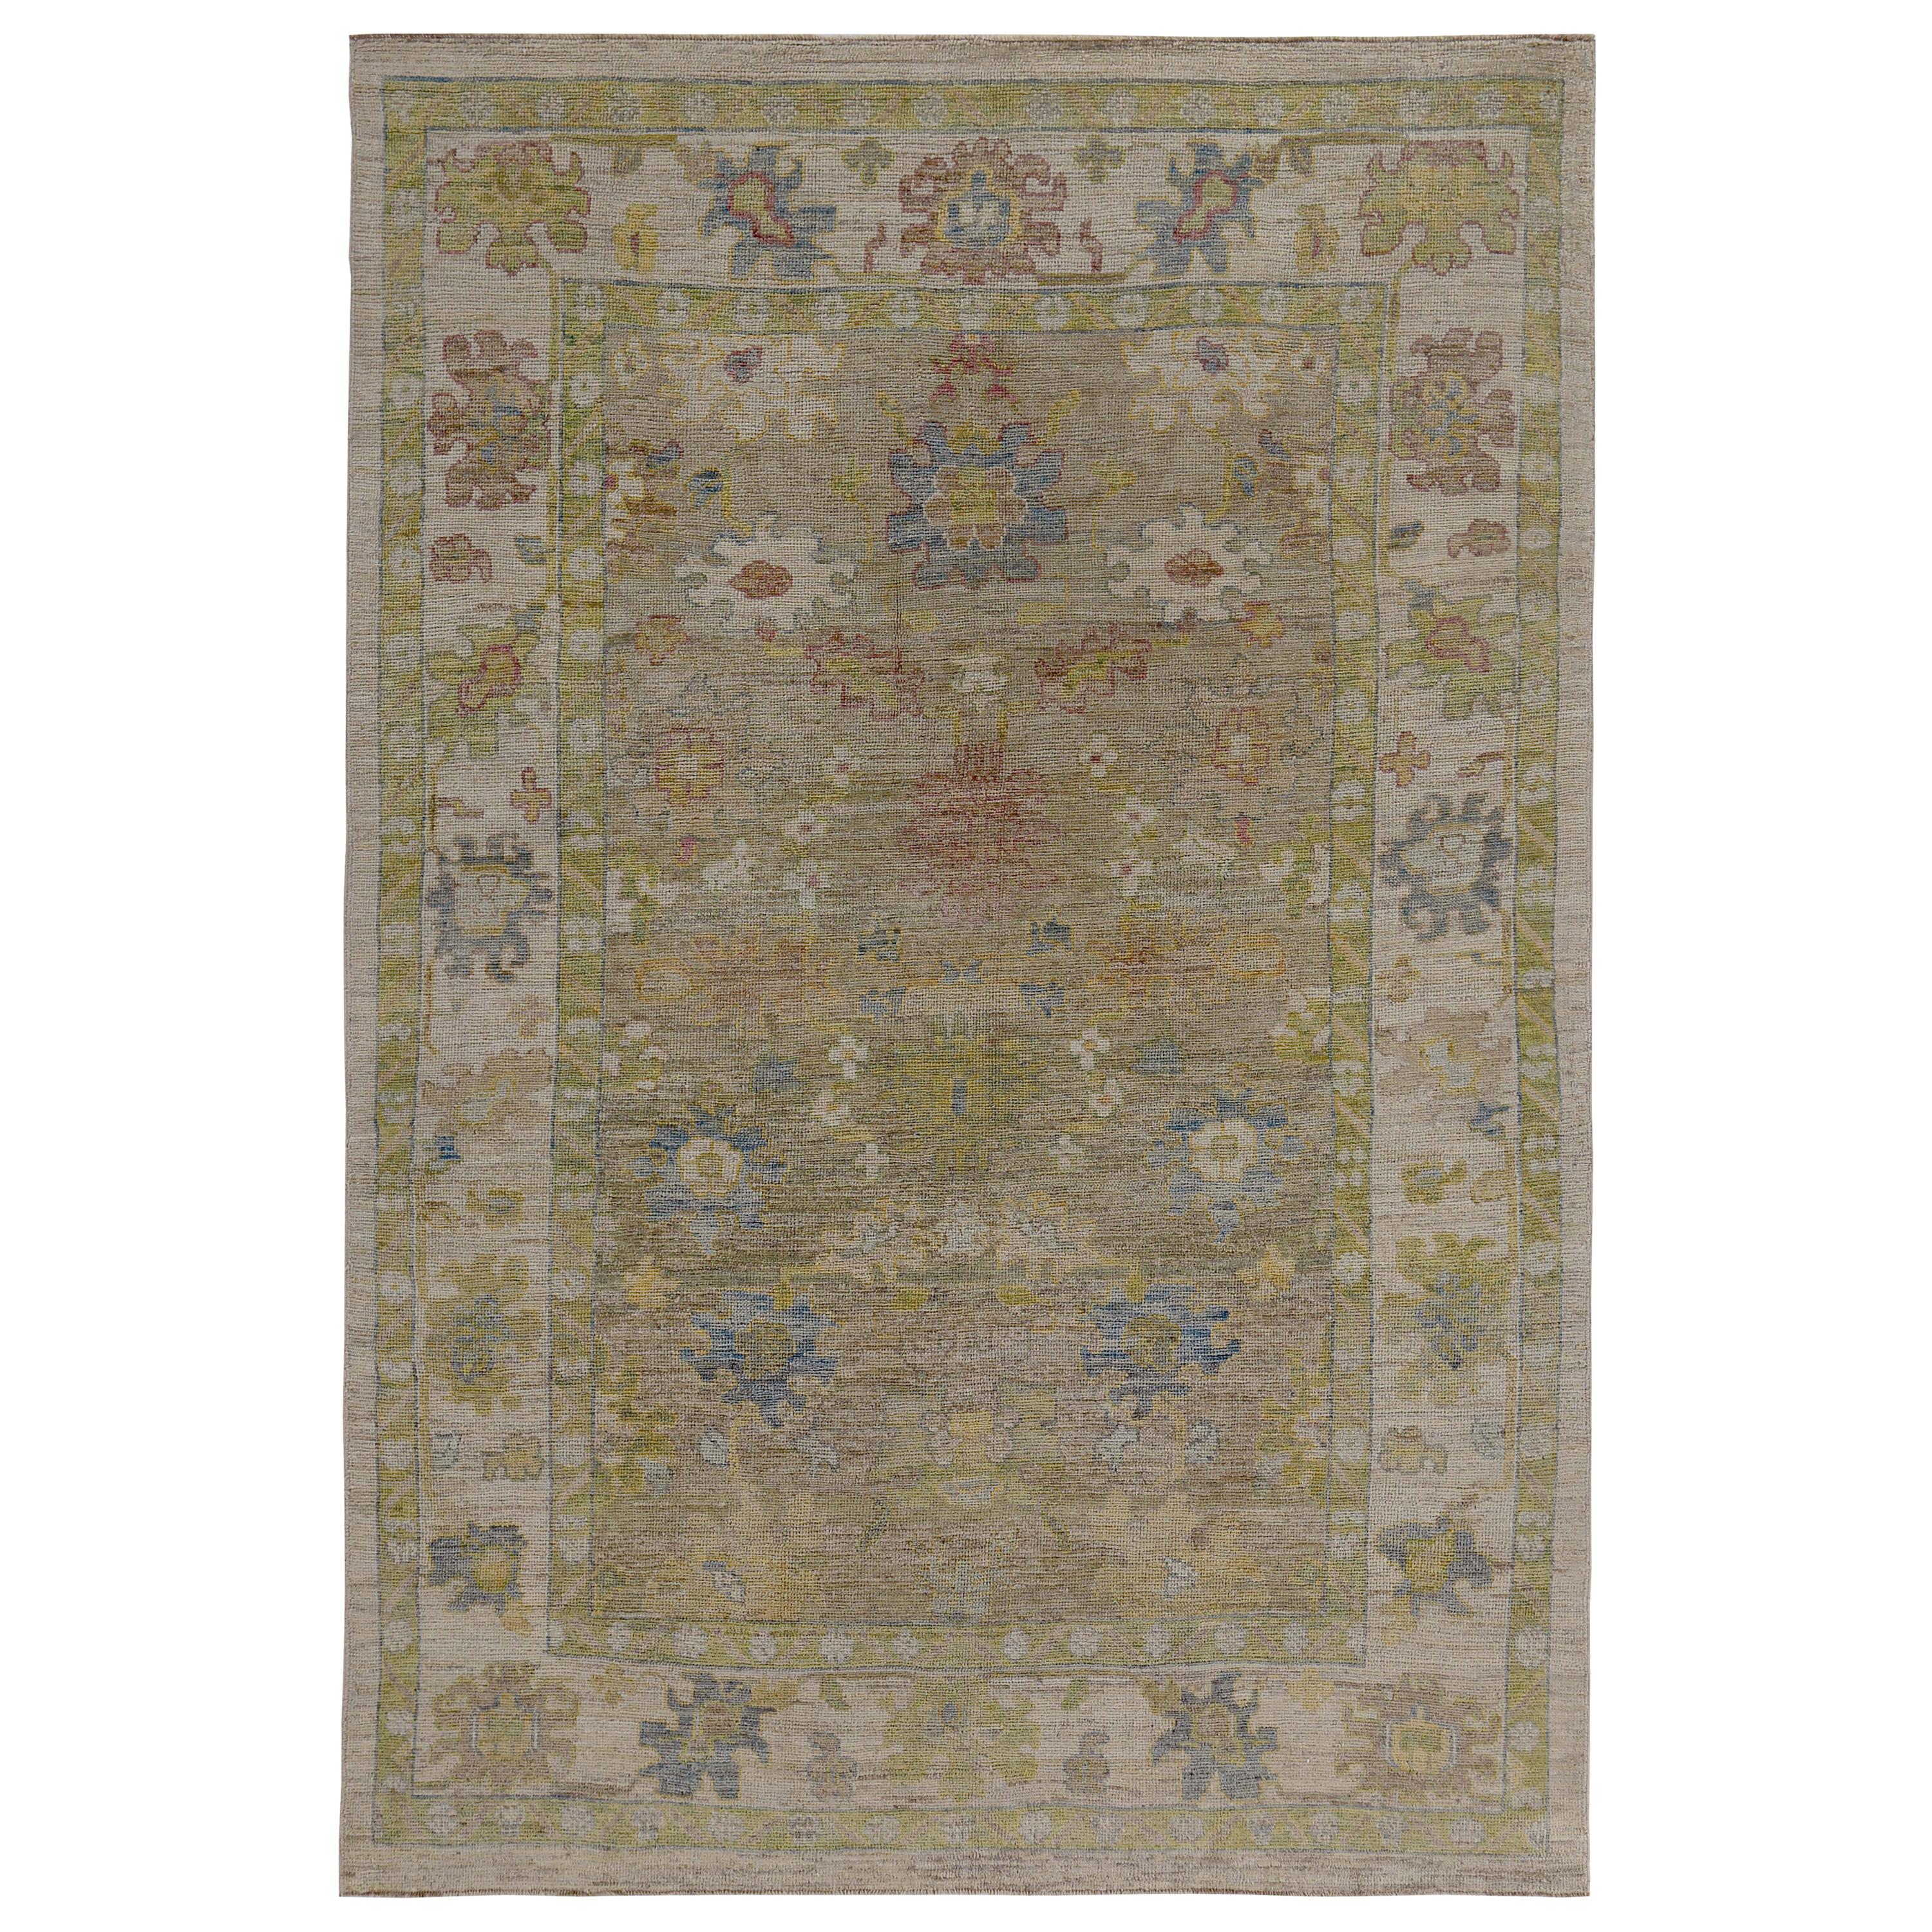 Turkish Oushak Rug with Blue, Red and Green Flower Heads on Brown Field